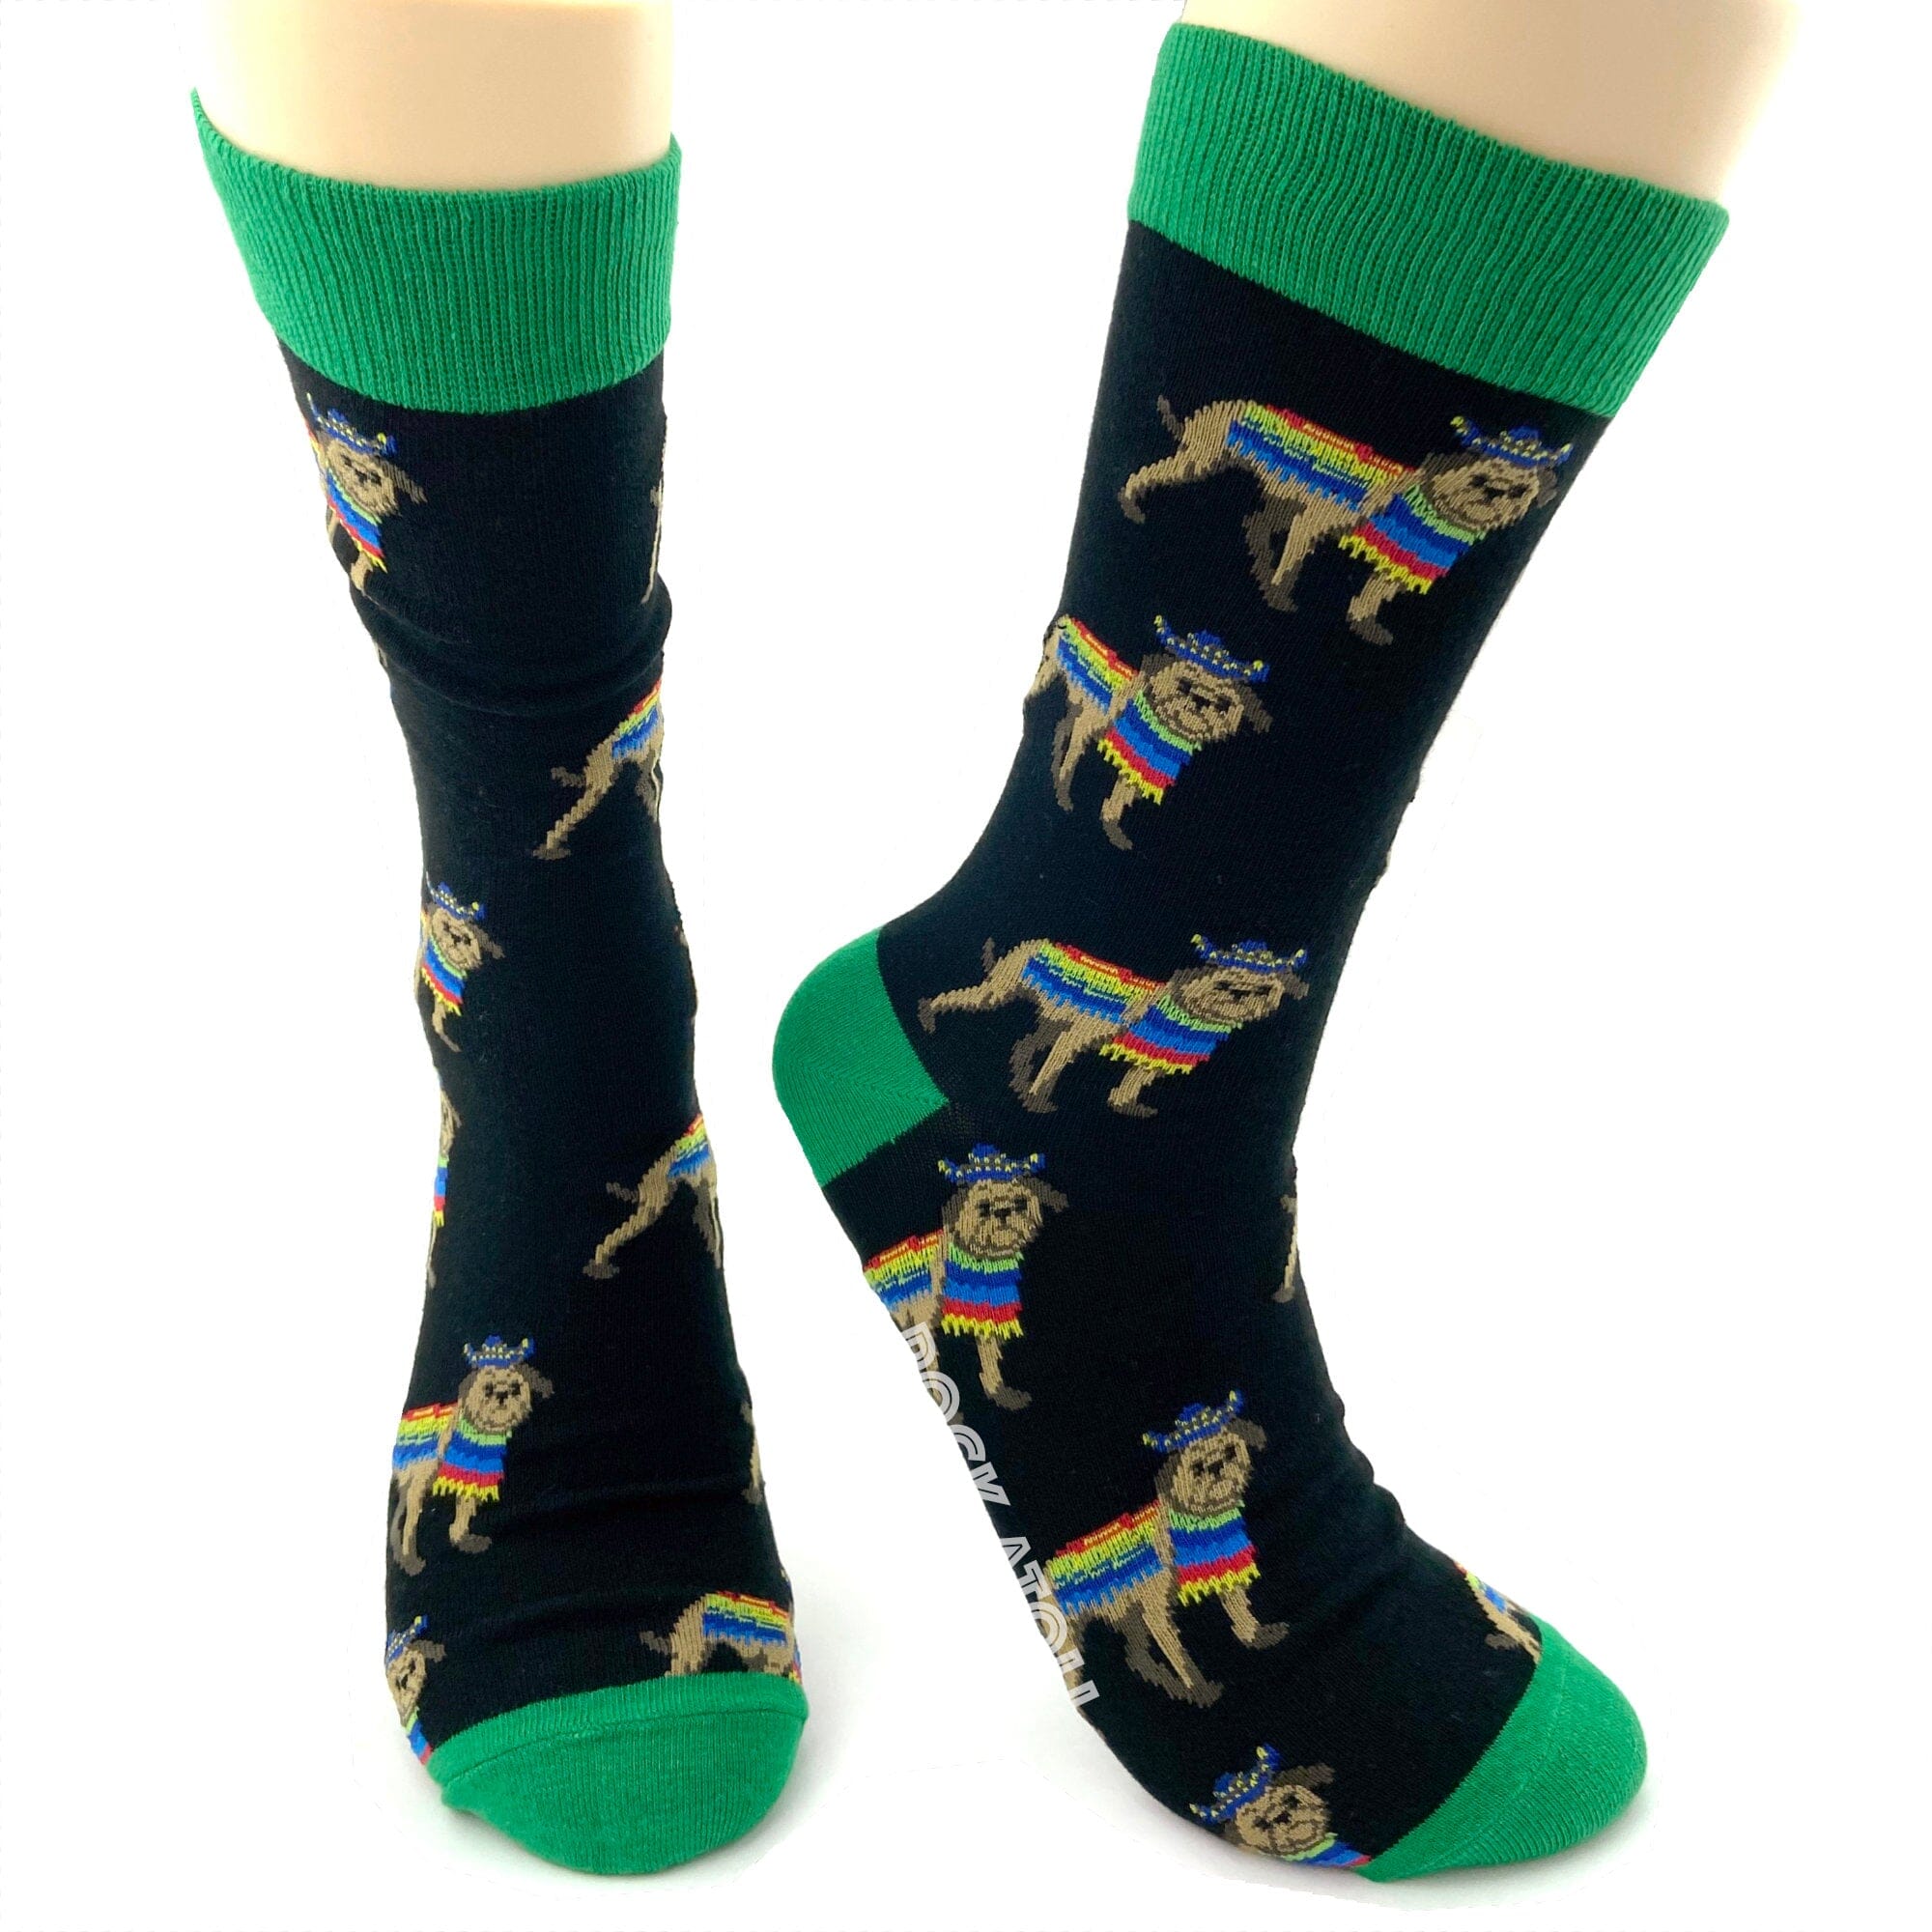 Fun Unique Pug Dogs in Sombreros Themed Long Novelty Crew Socks